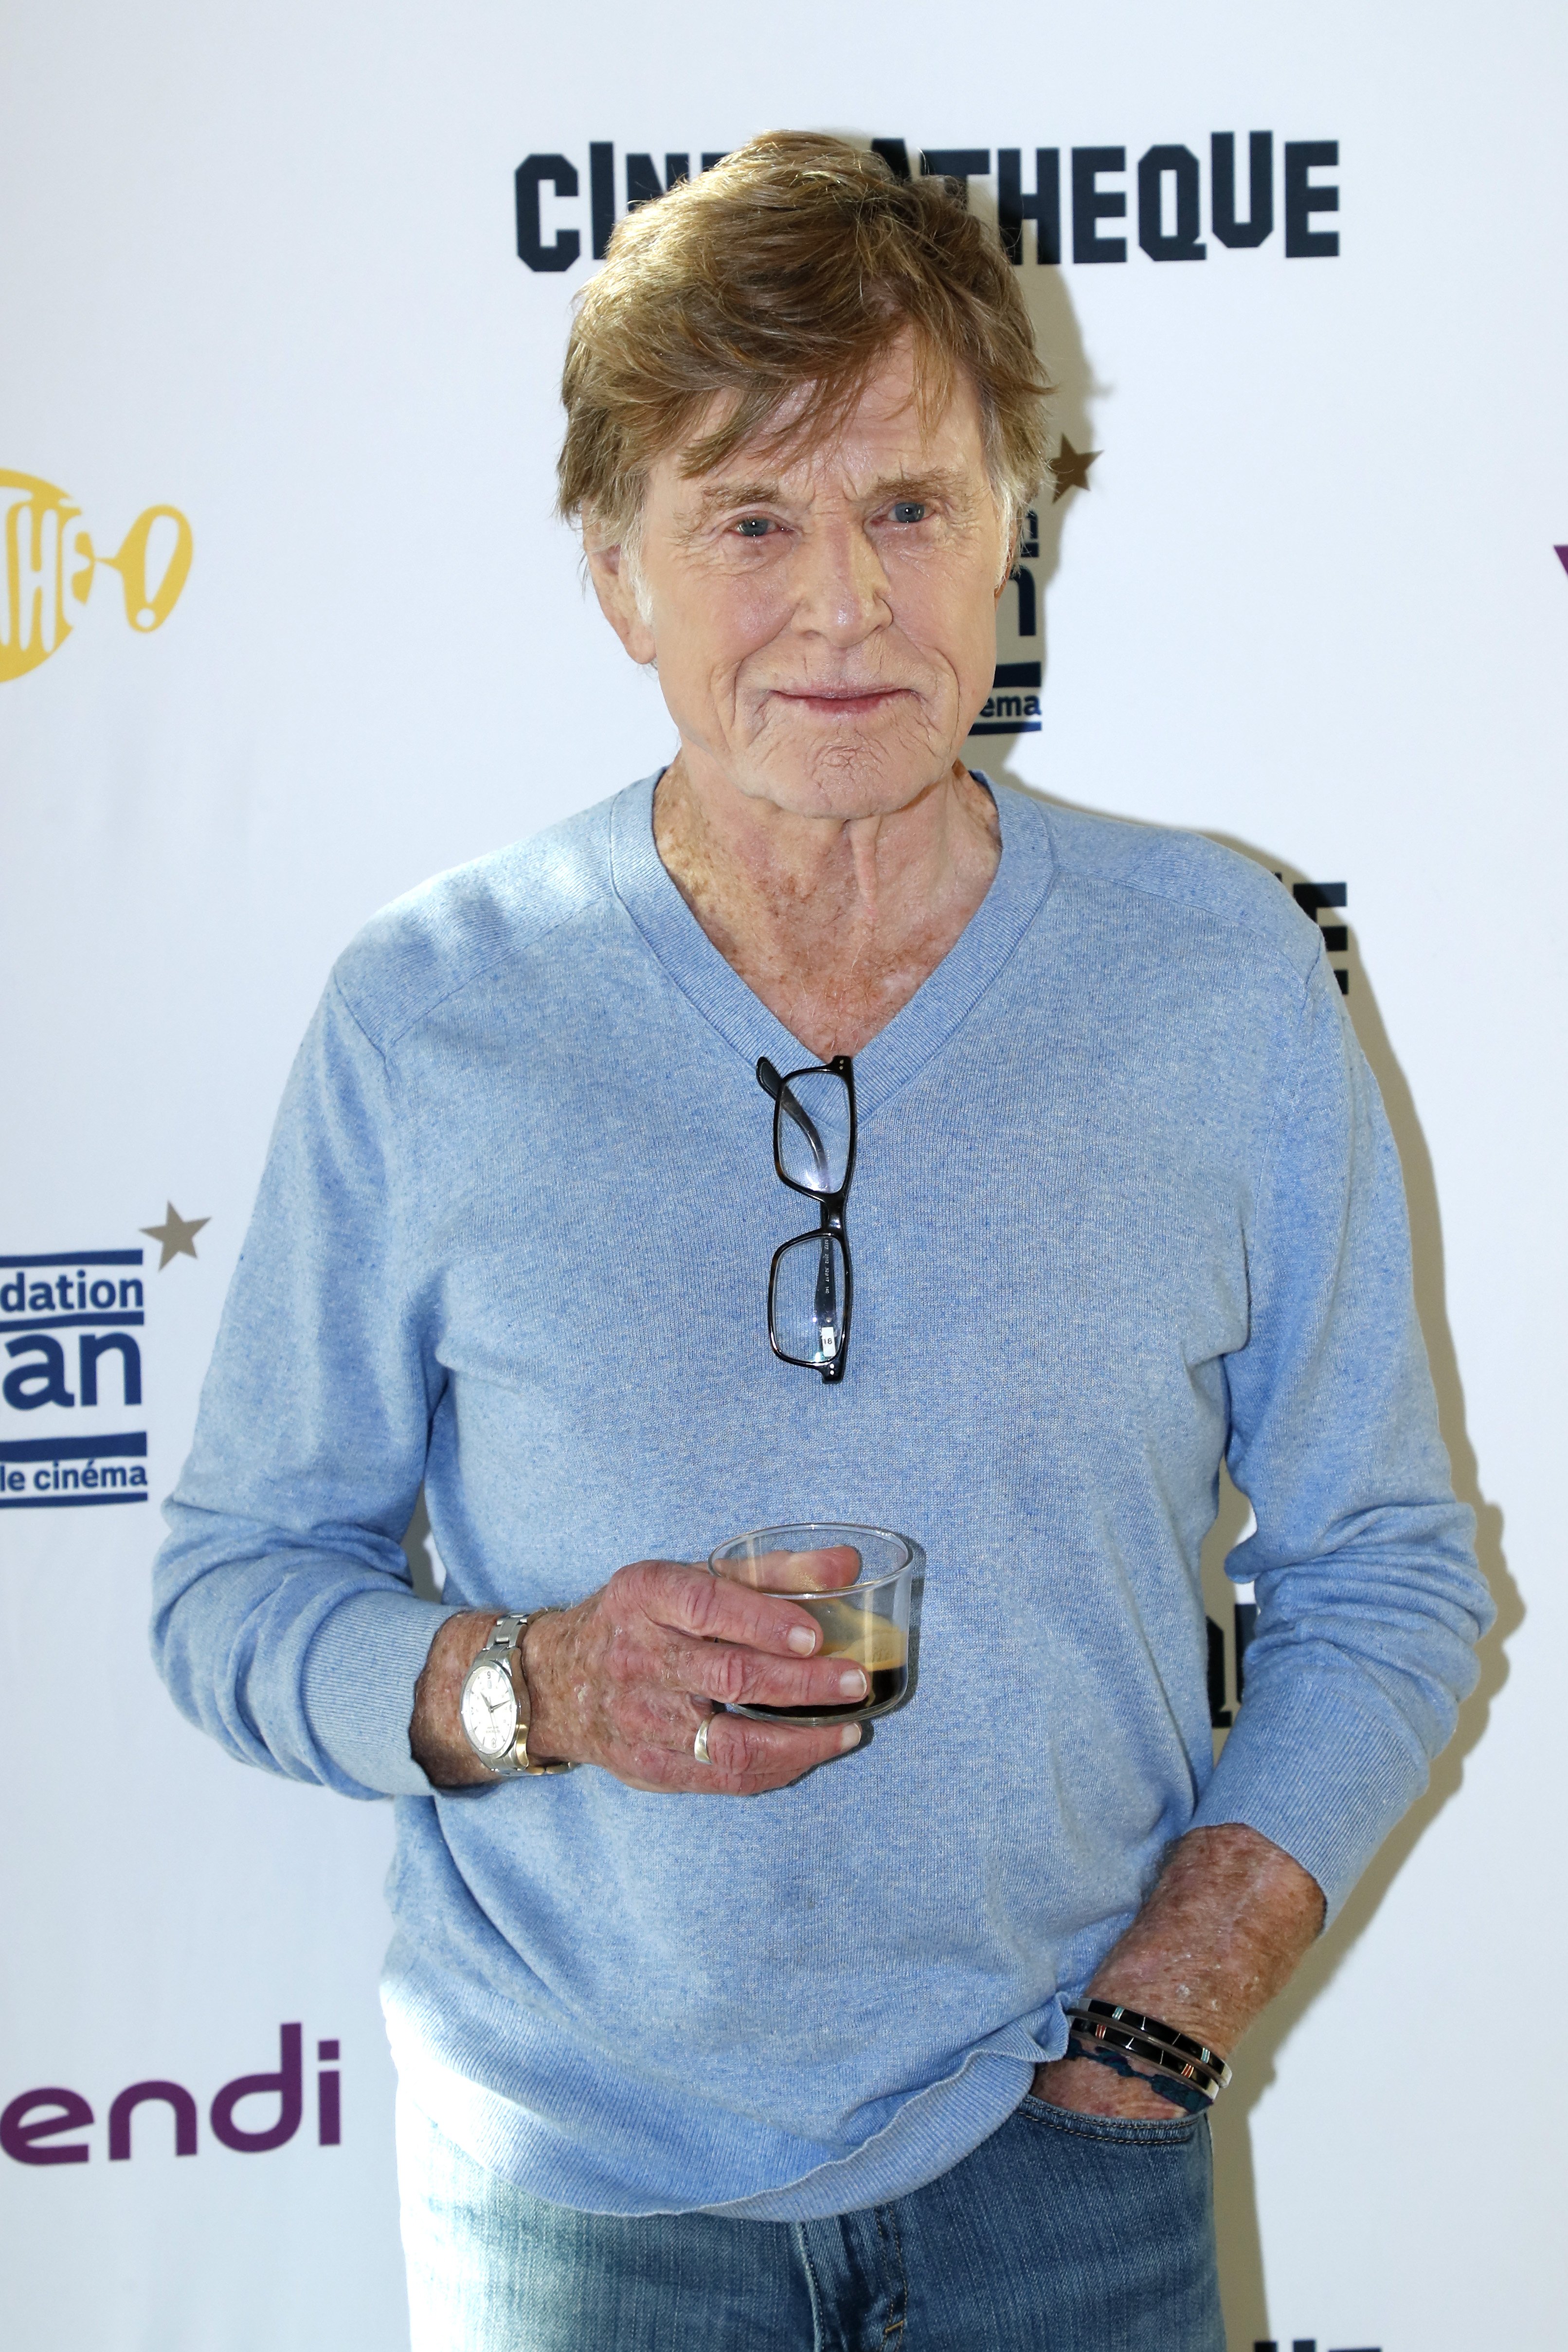 Robert Redford at Cinematheque Francaise on February 21, 2019 in Paris, France. | Photo: Getty Images